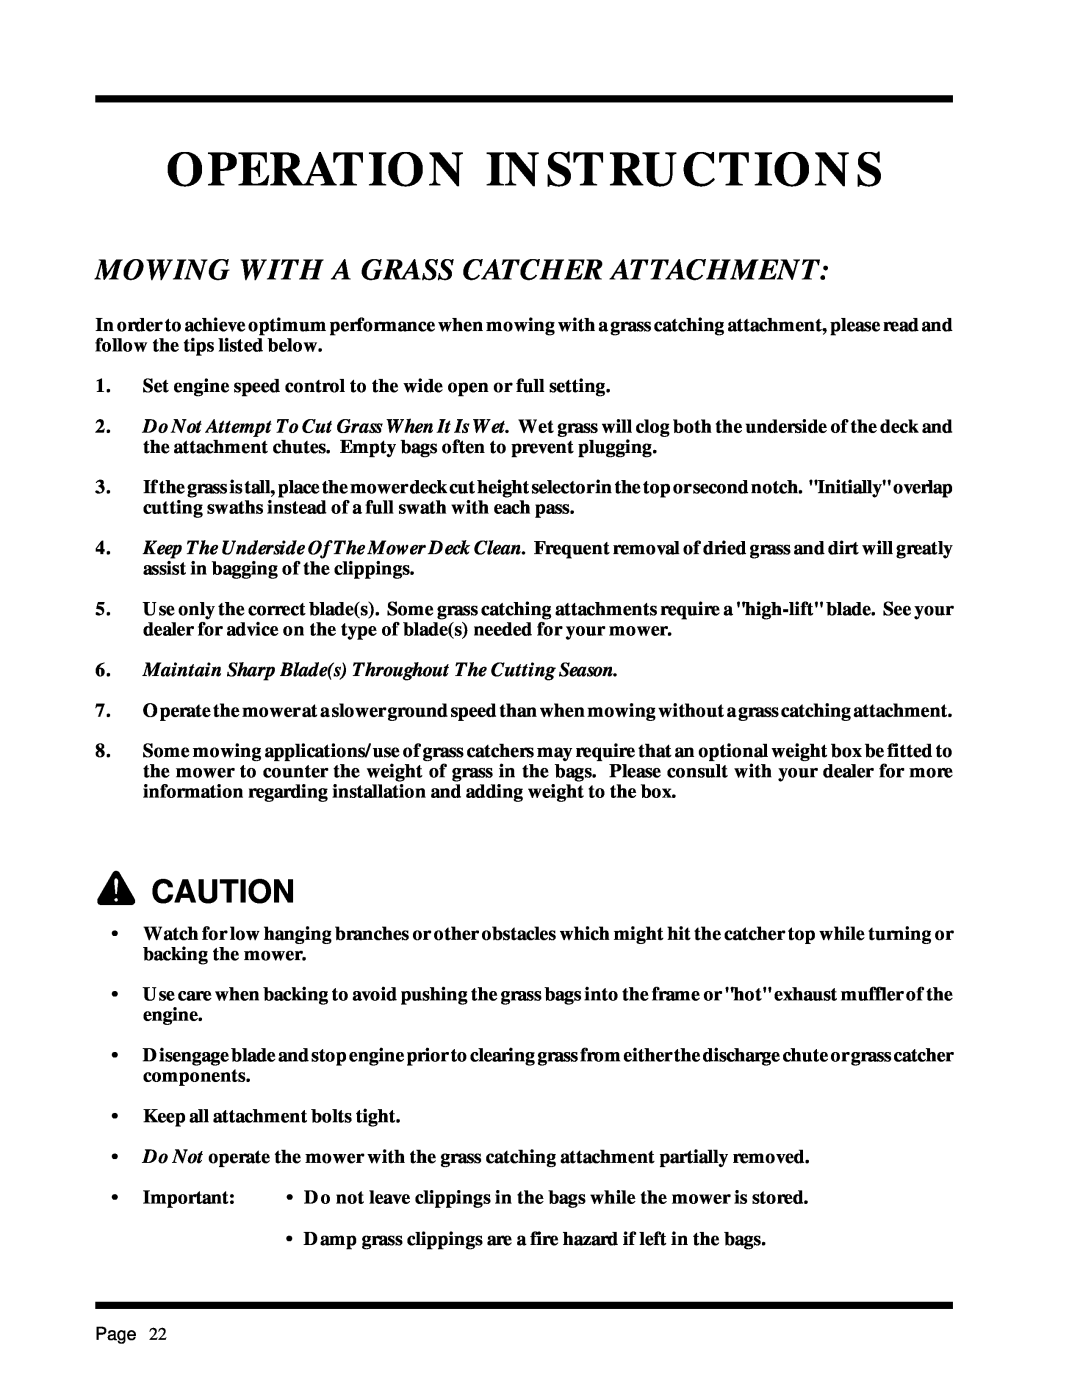 Dixon 6025 manual Mowing With A Grass Catcher Attachment, Operation Instructions 